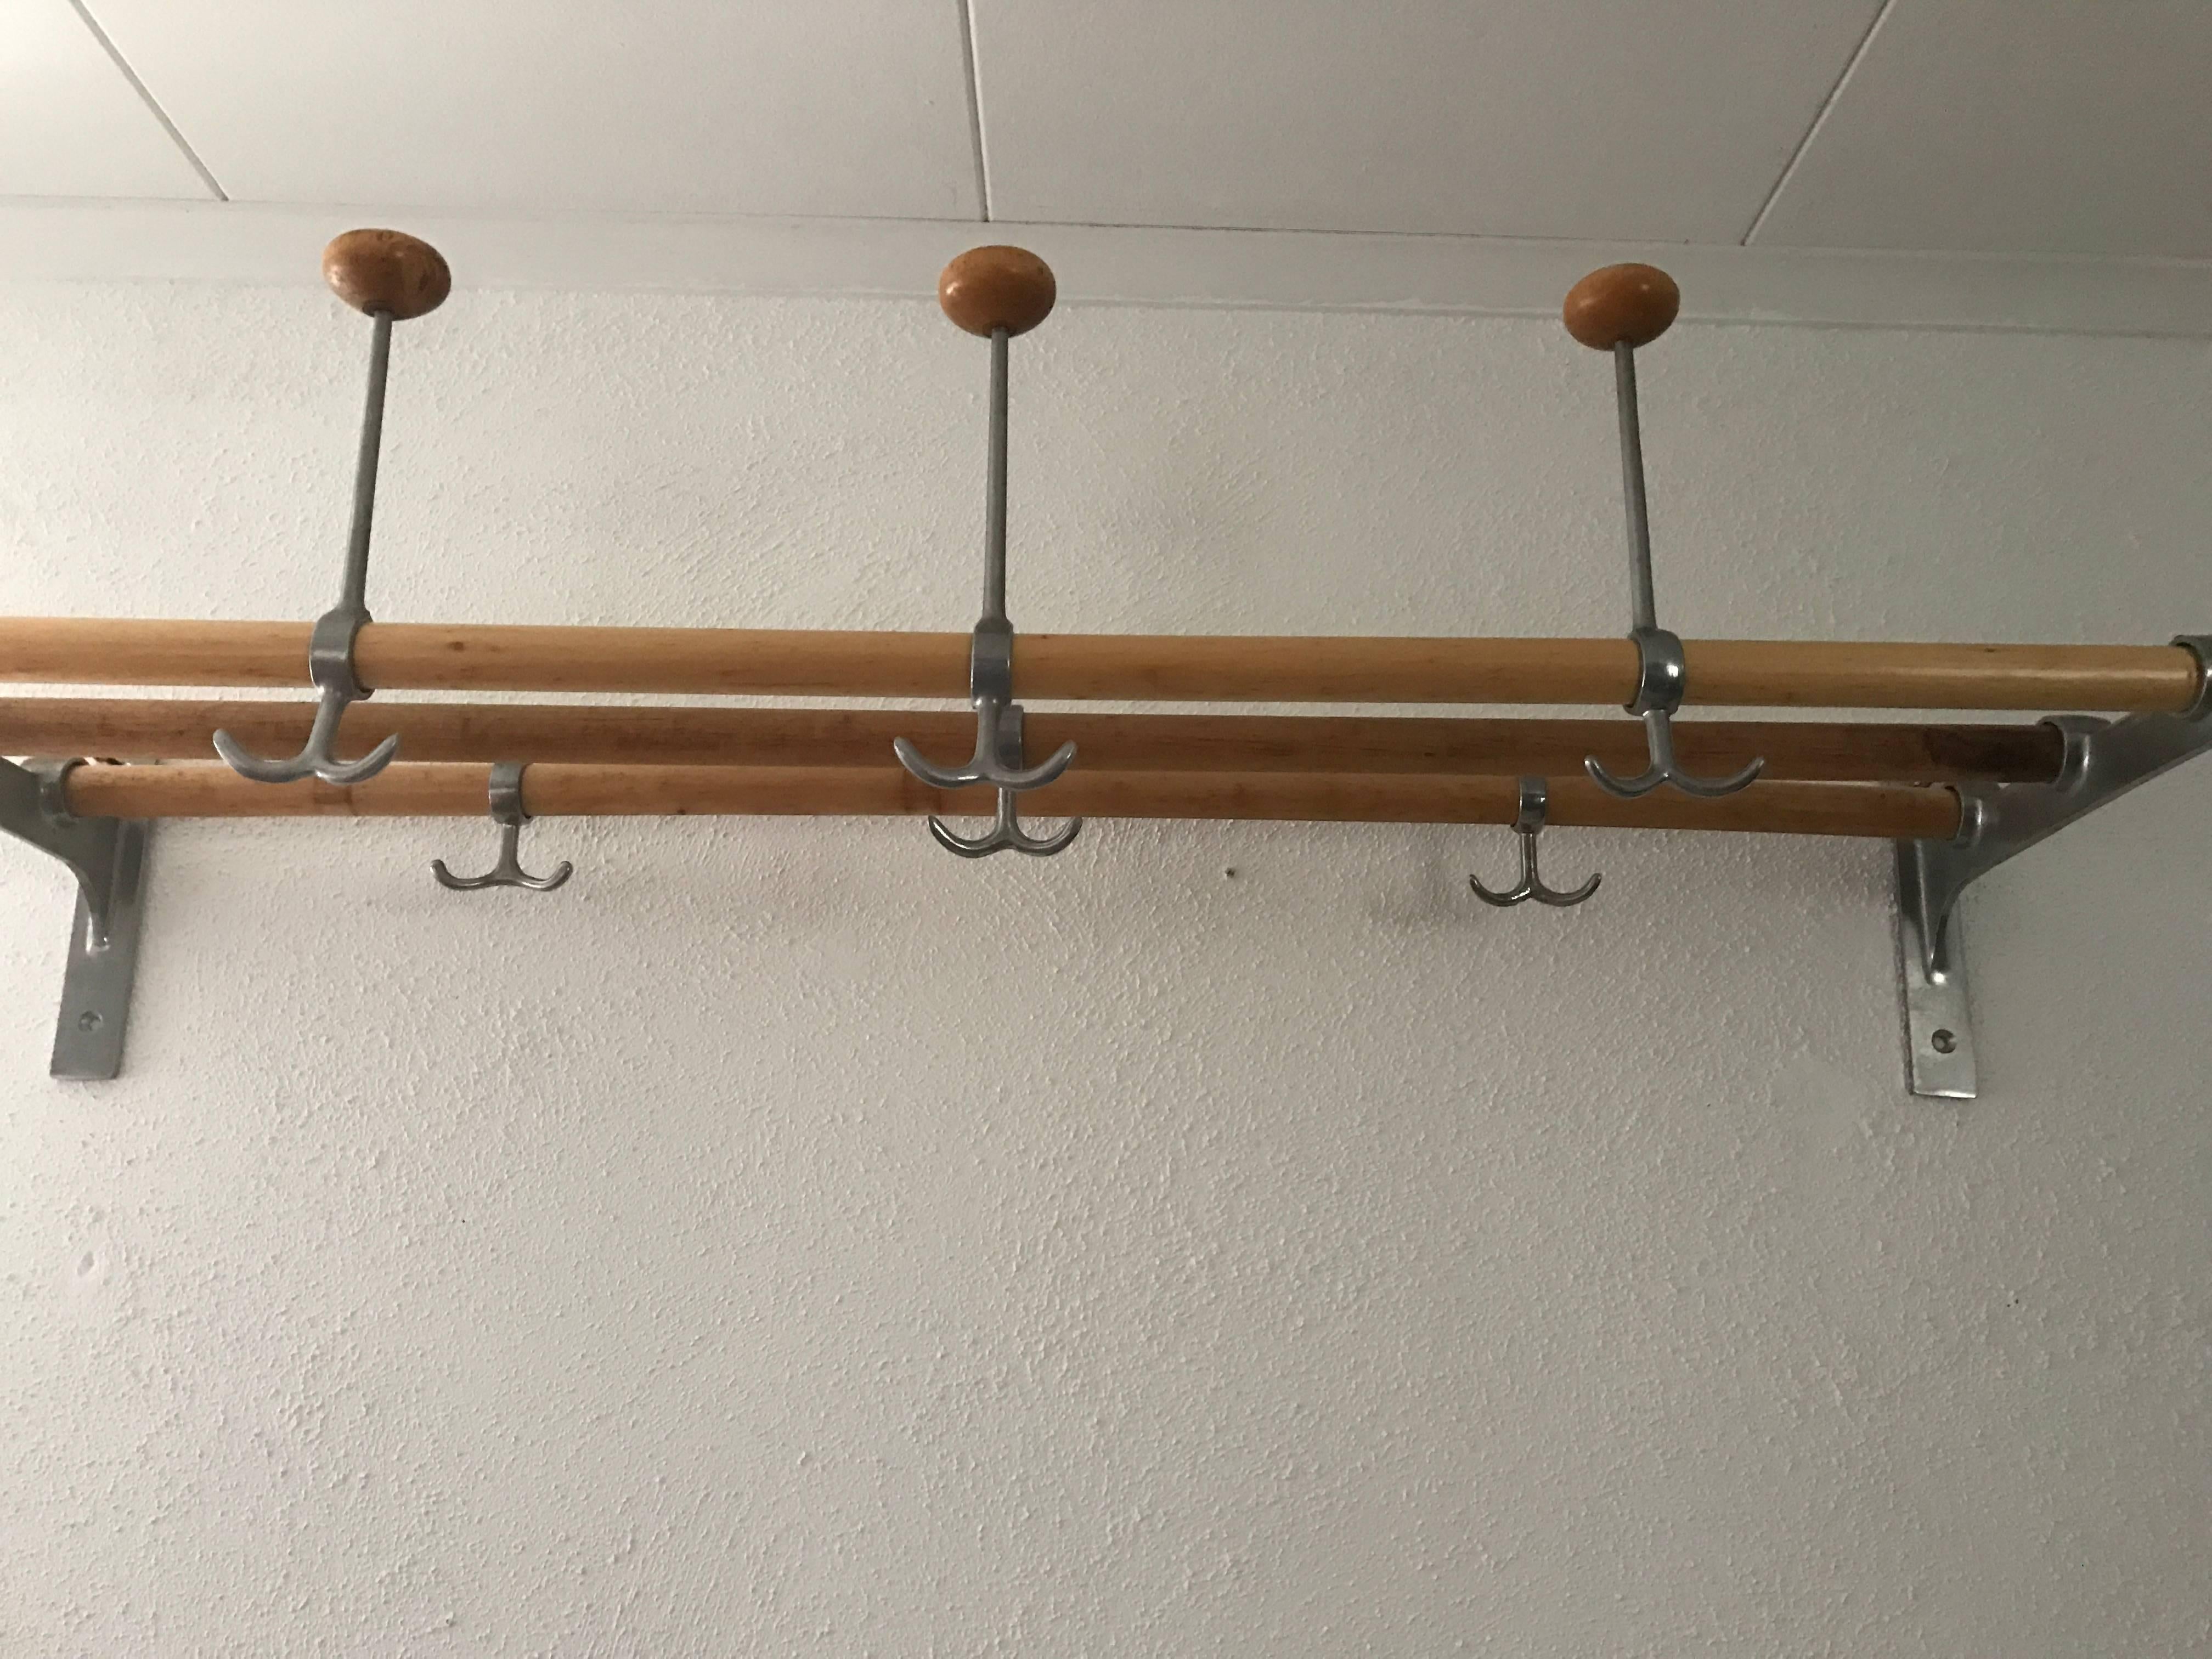 Brushed Mid-20th Century Swedish Functionalistic Coat and Hat Rack Wall Mount For Sale